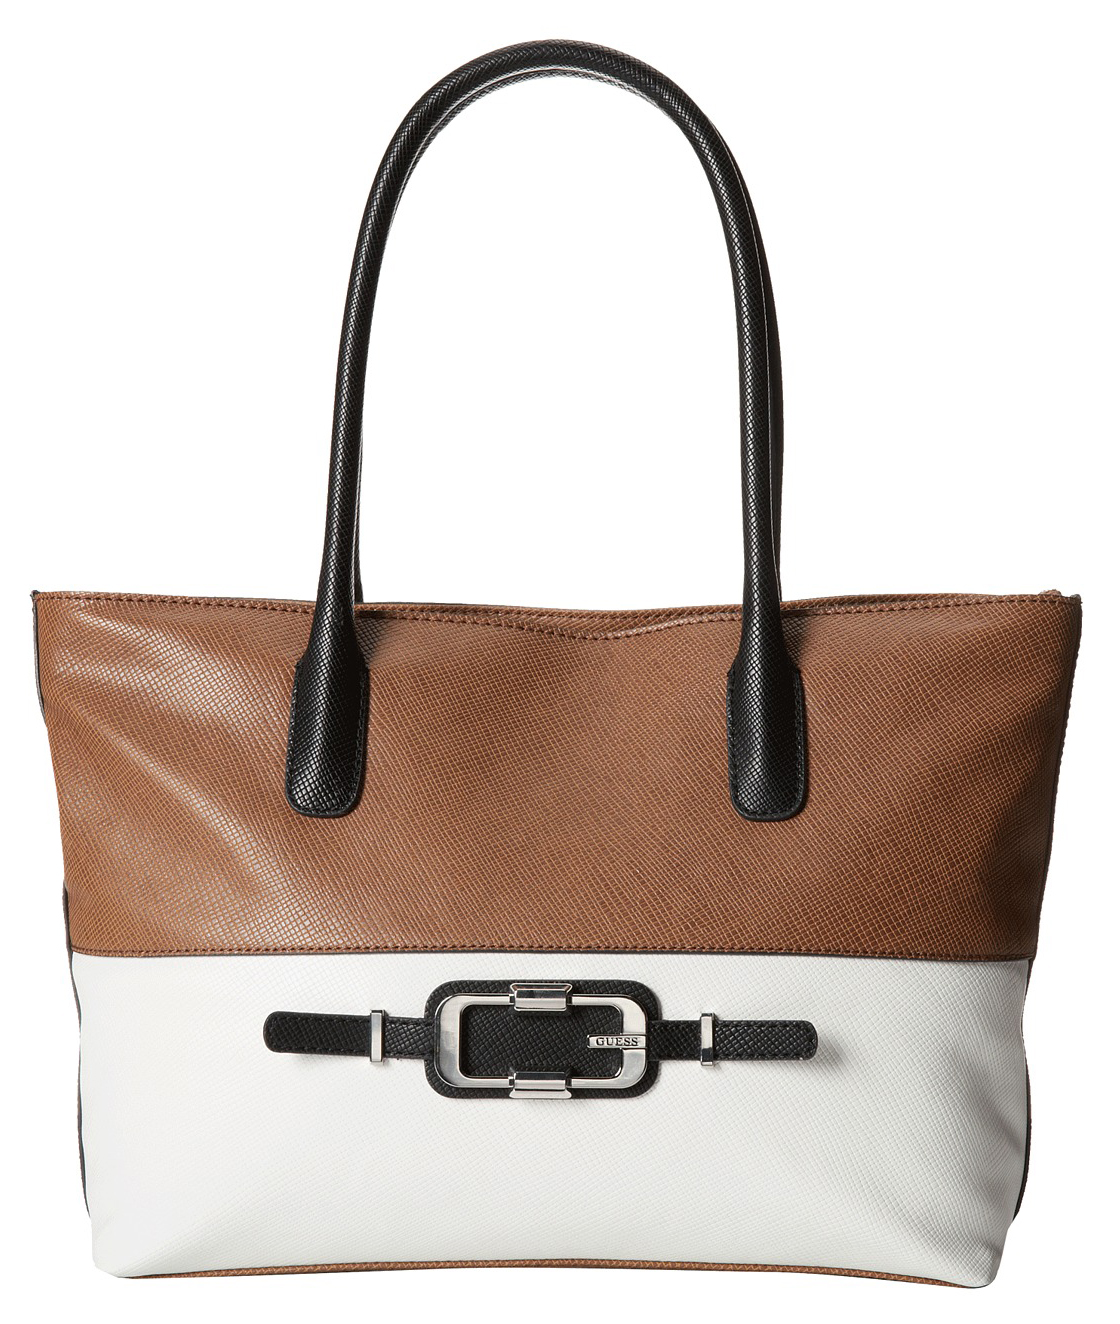 WEEKEND DEALS: 6 Stylish Travel Totes on sale now for $100 or less ...